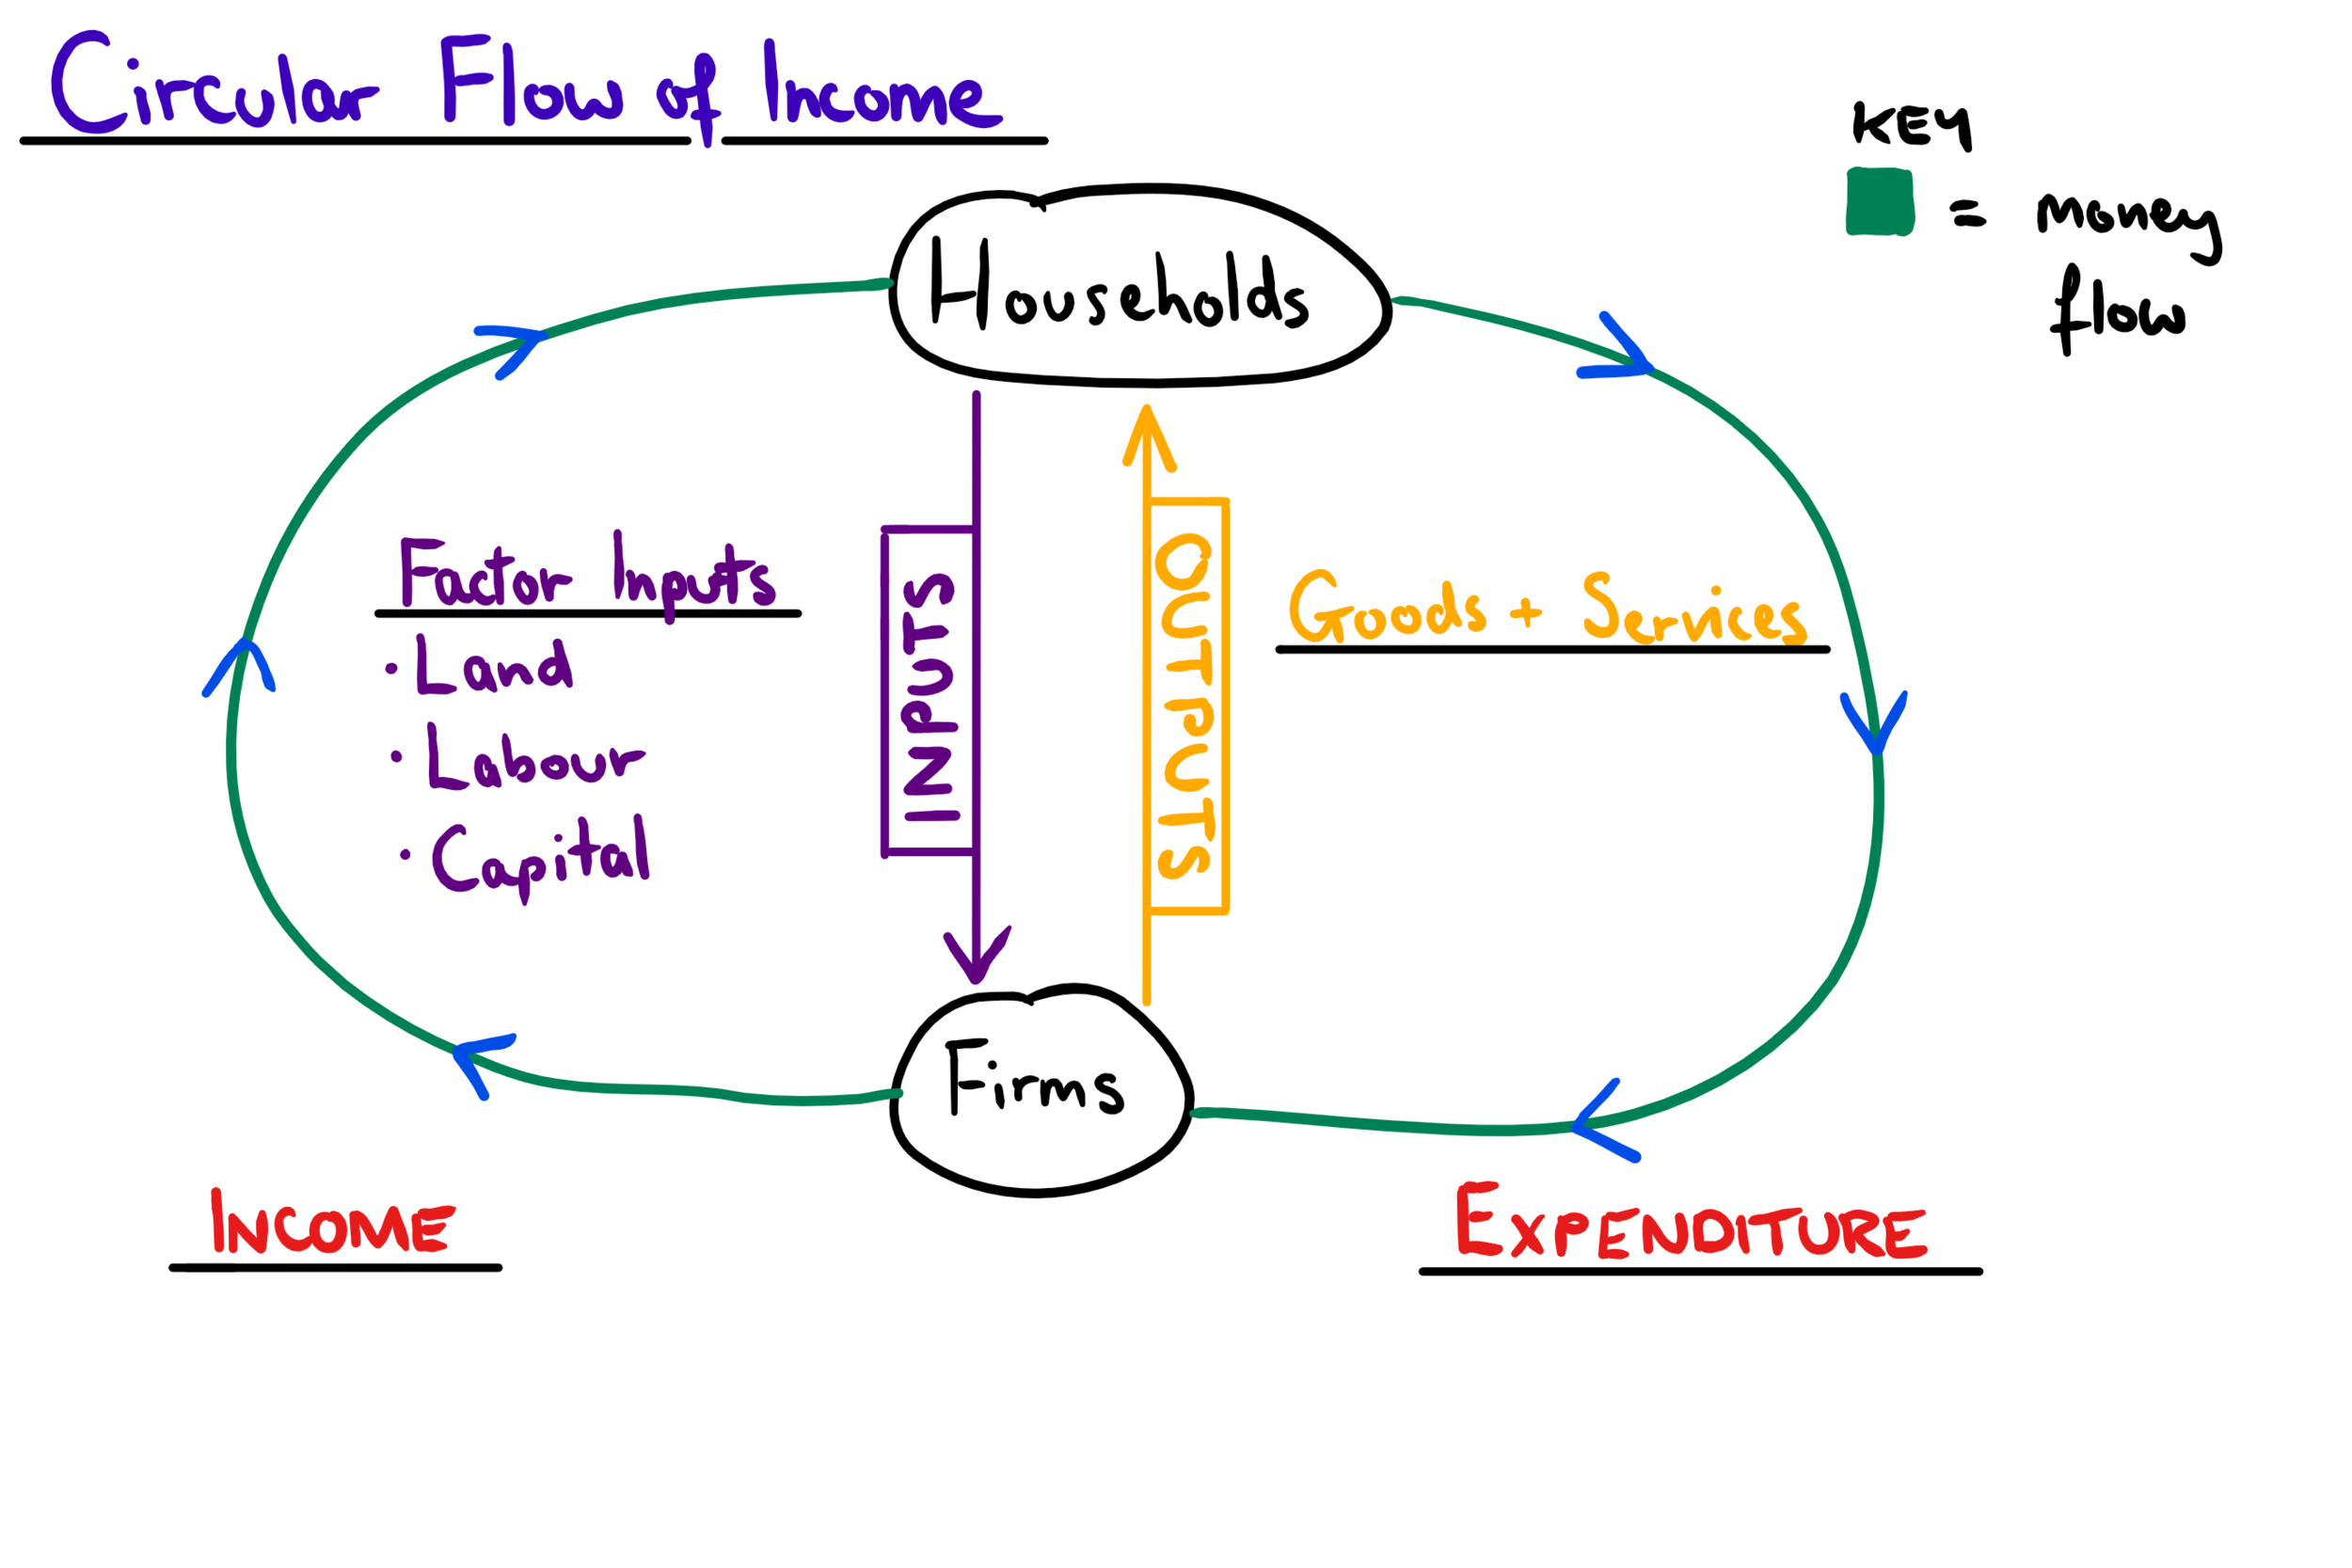 assignment on circular flow of income